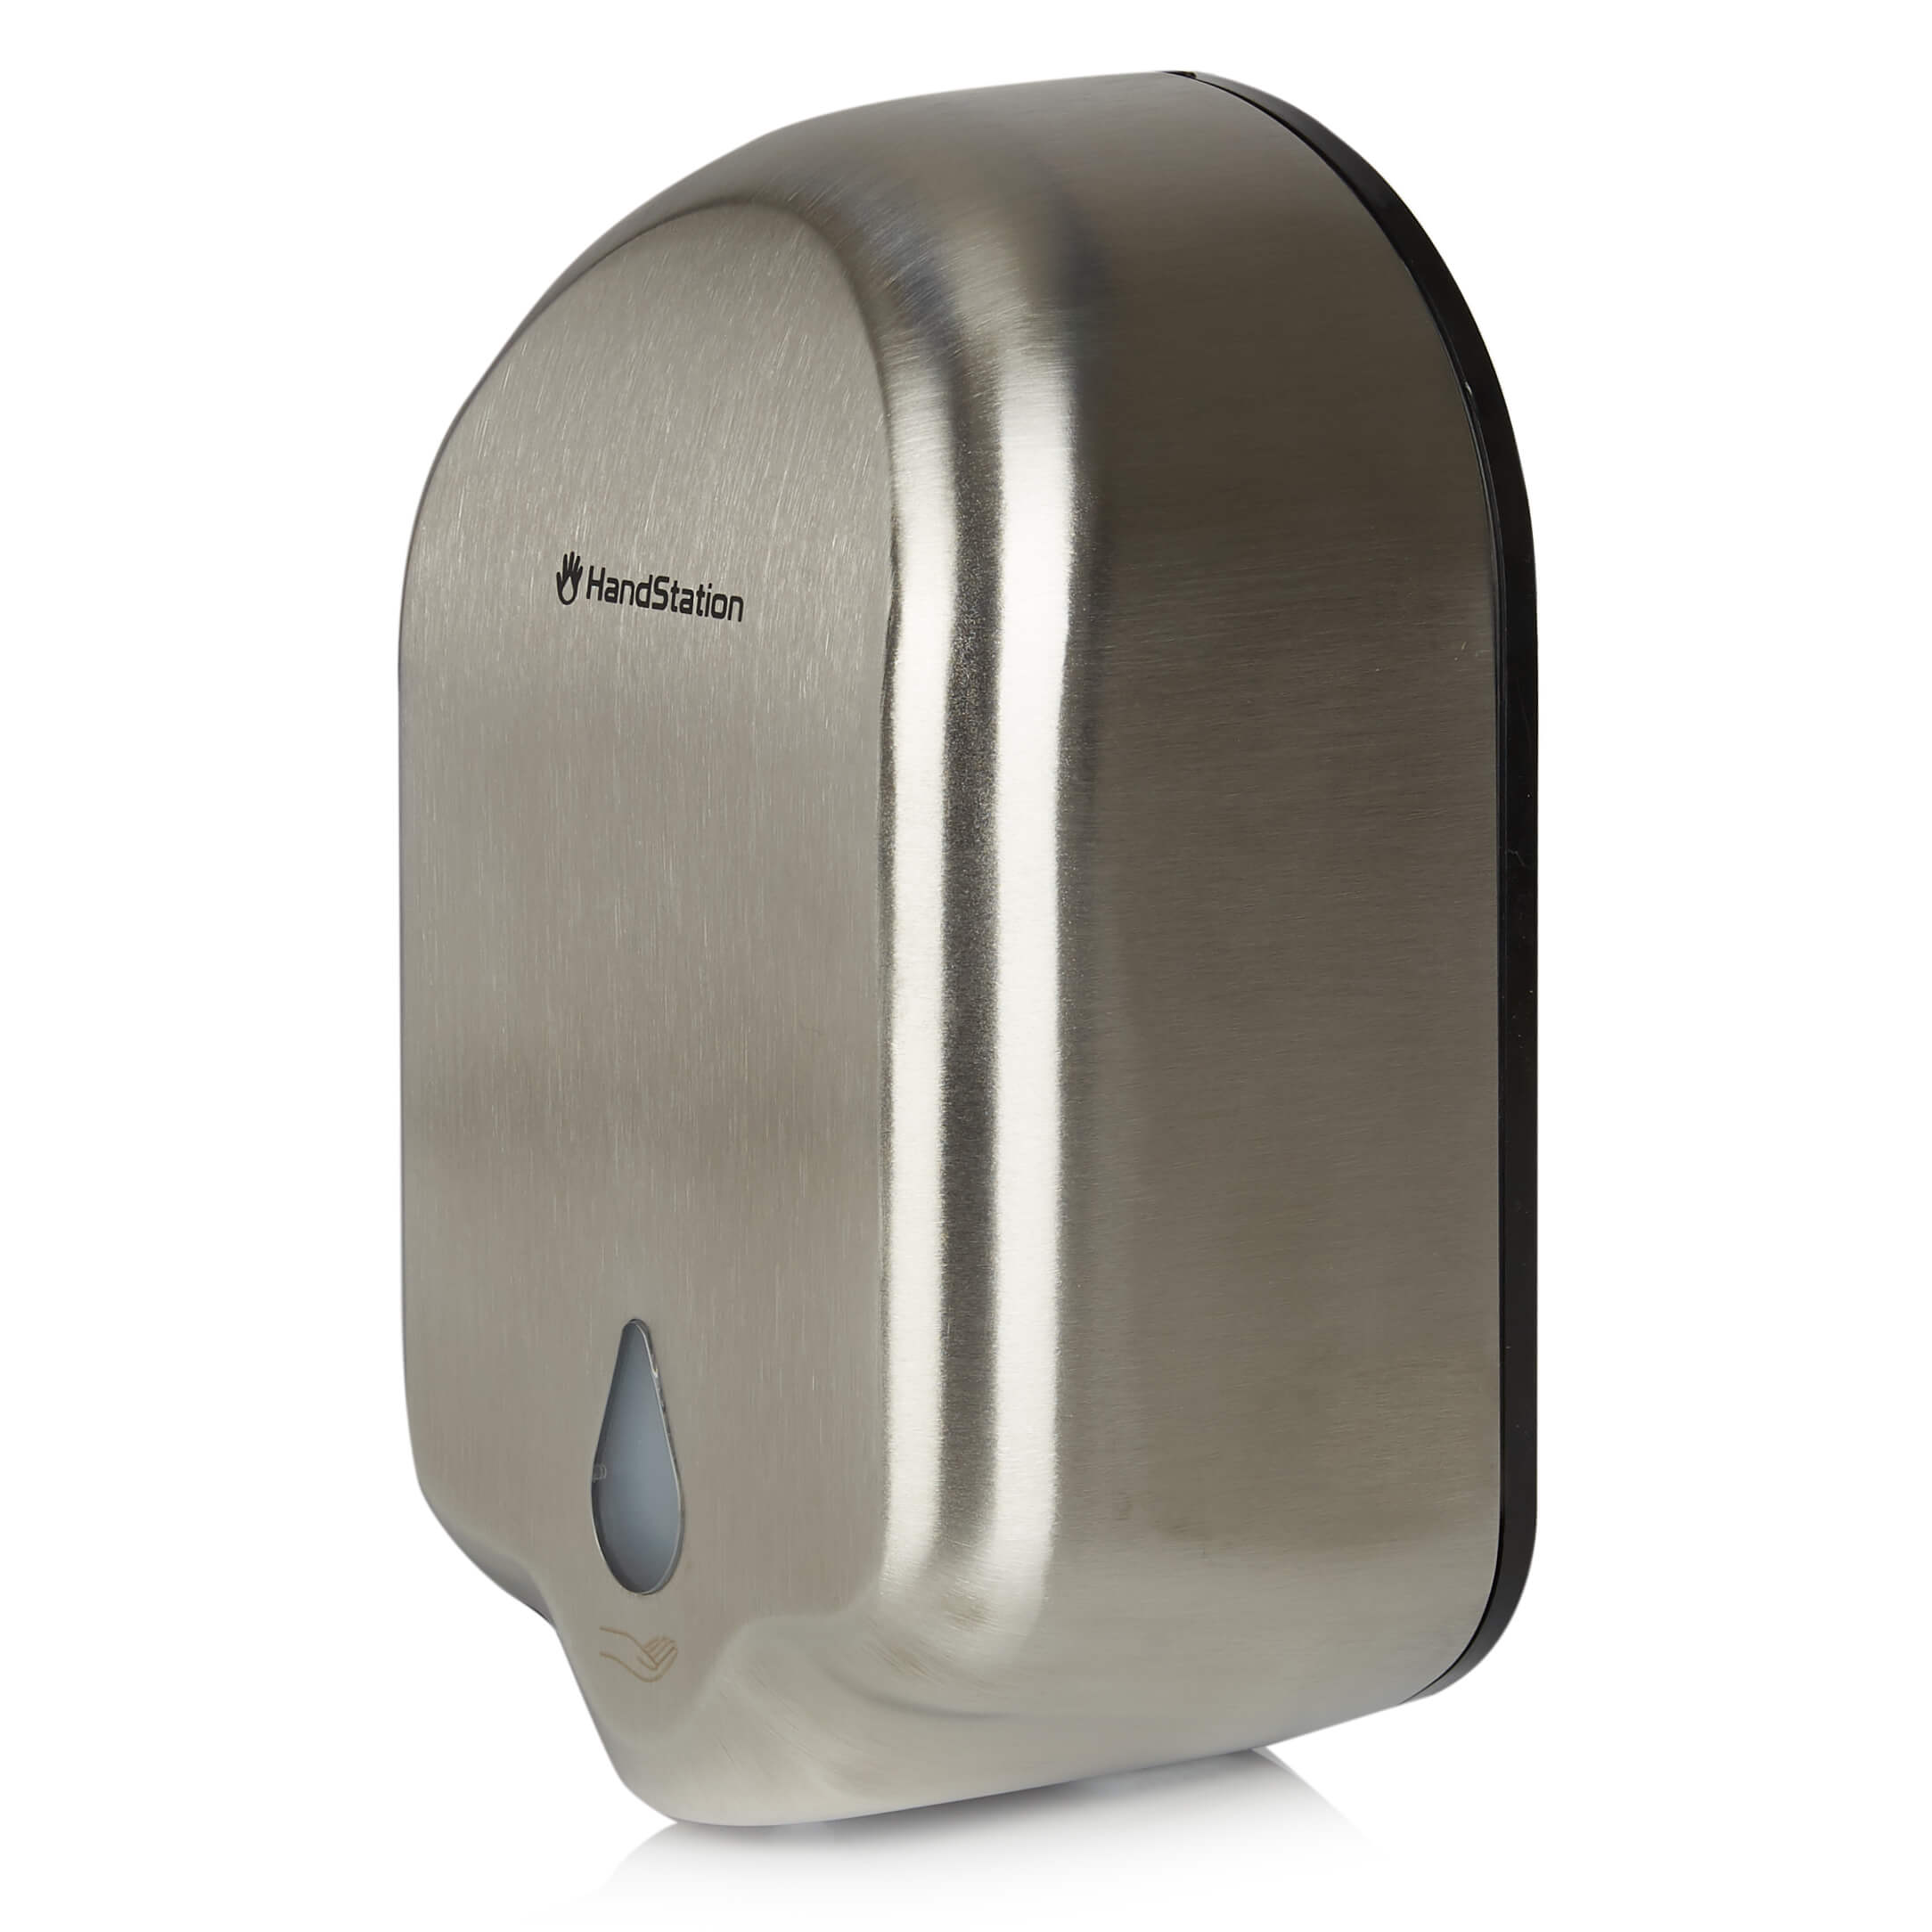 HandStation Eco Stainless Wall Mounted Automatic Touch Free Hand Sanitiser System - Foam Dispenser